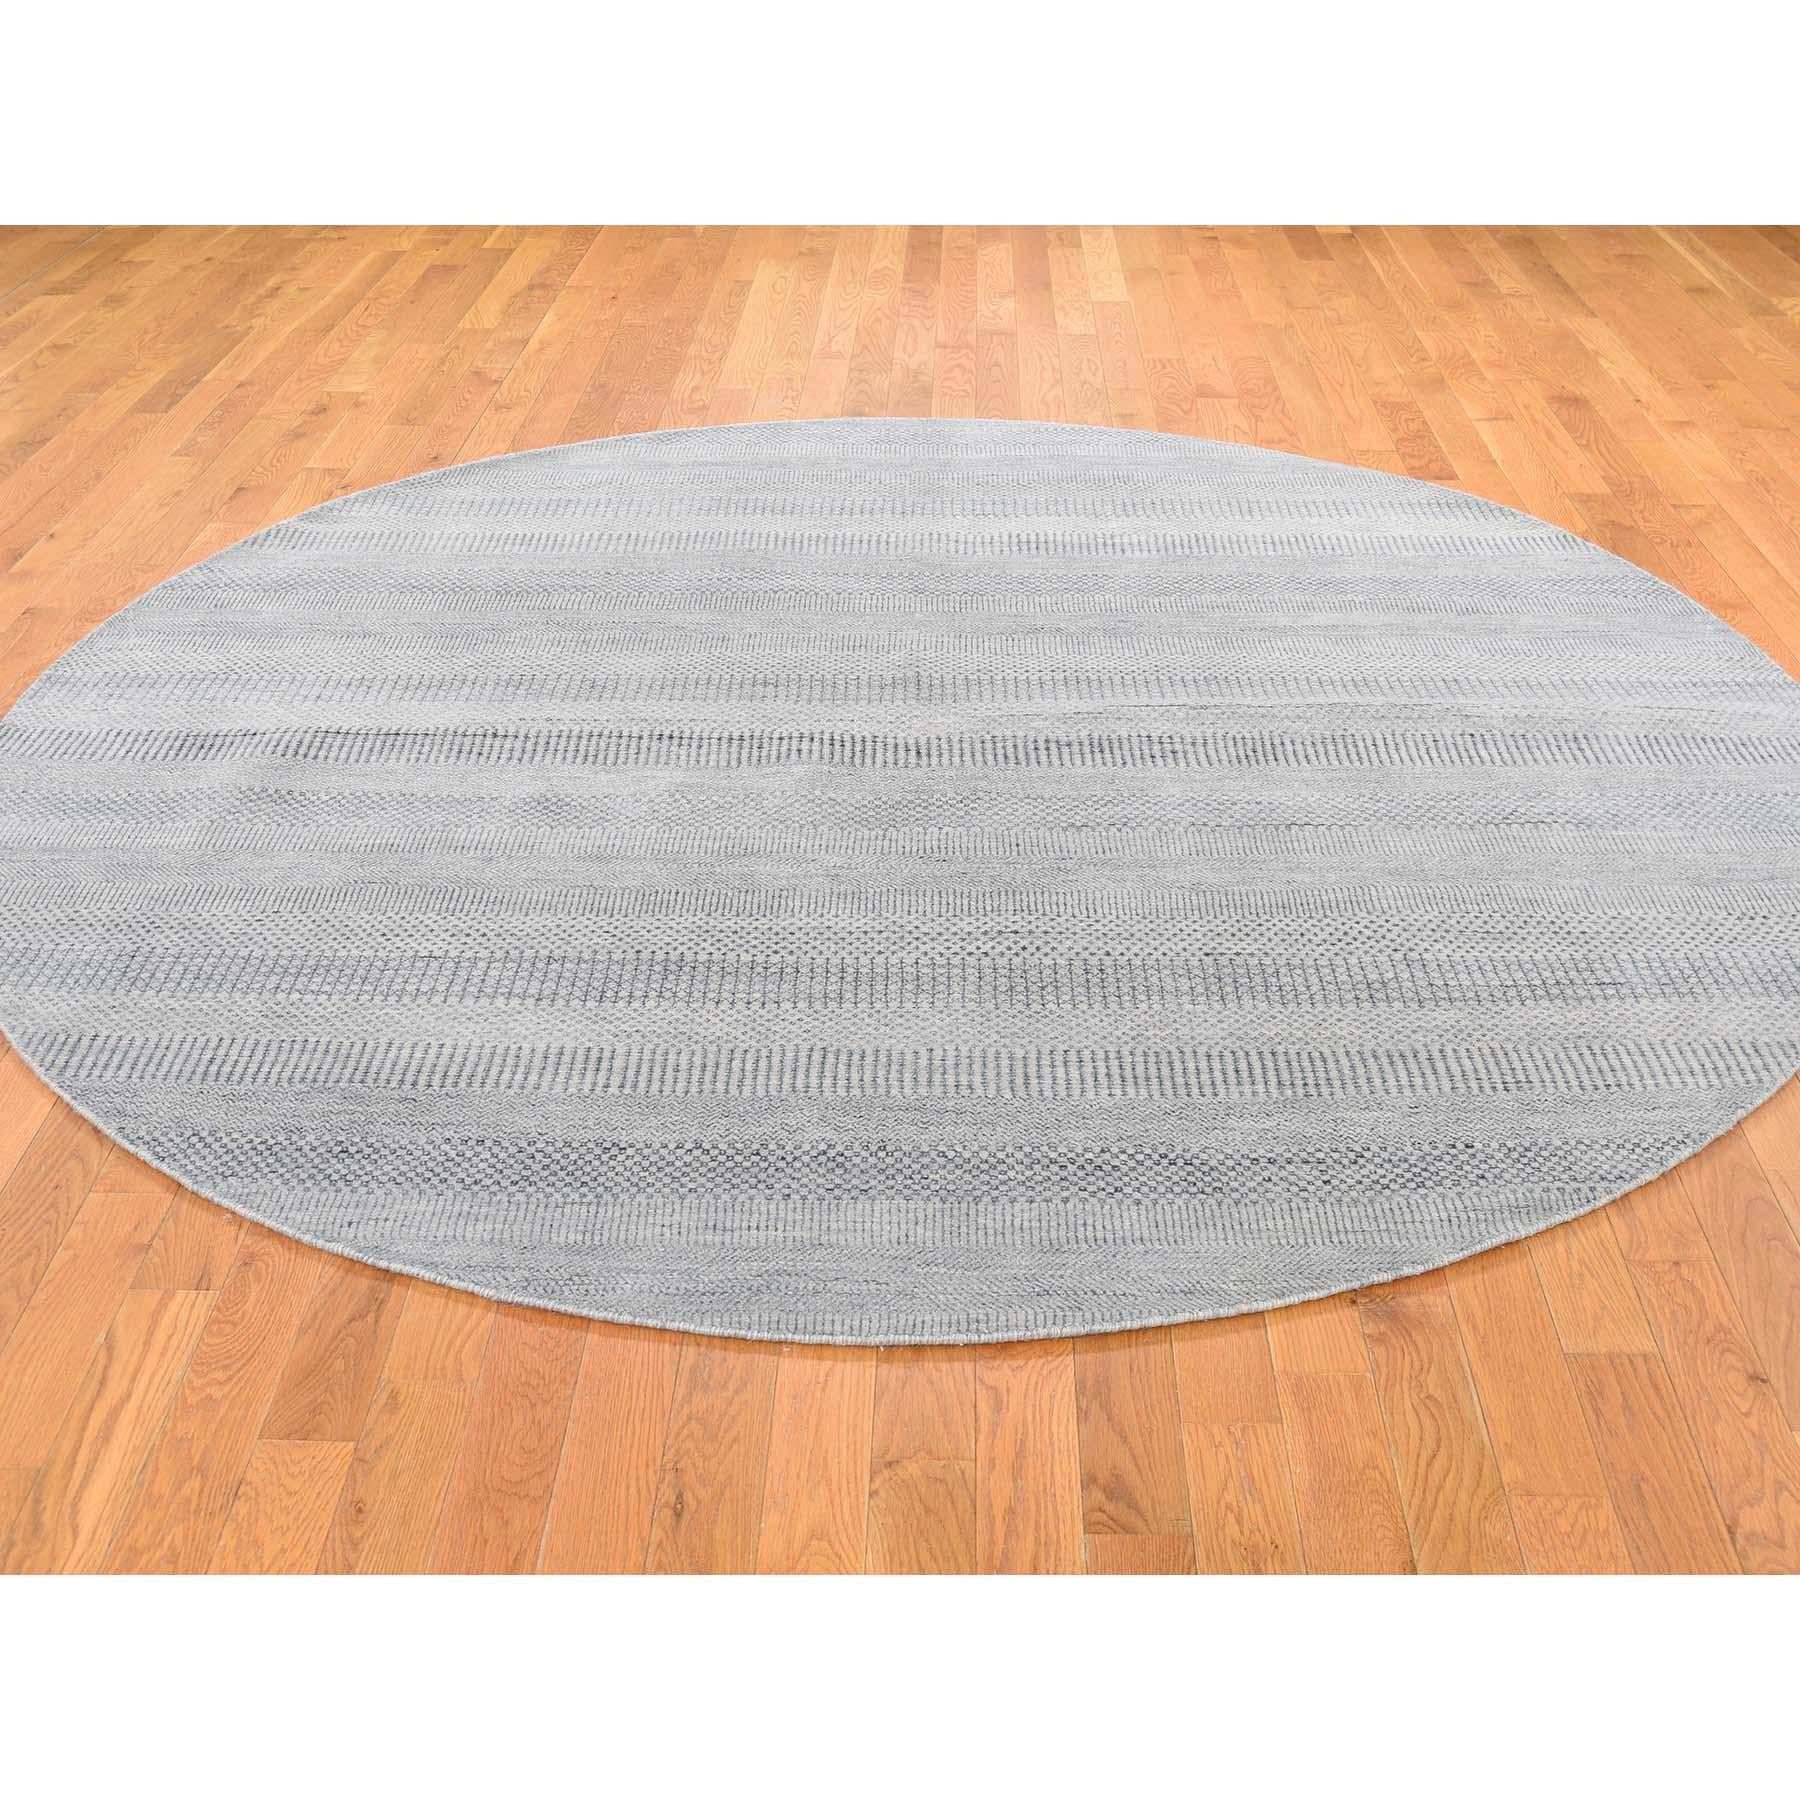 This is a truly genuine one-of-a-kind hand knotted wool and silk grass design round Oriental rug. It has been knotted for months and months in the centuries-old Persian weaving craftsmanship techniques by expert artisans. Measures: 8'0